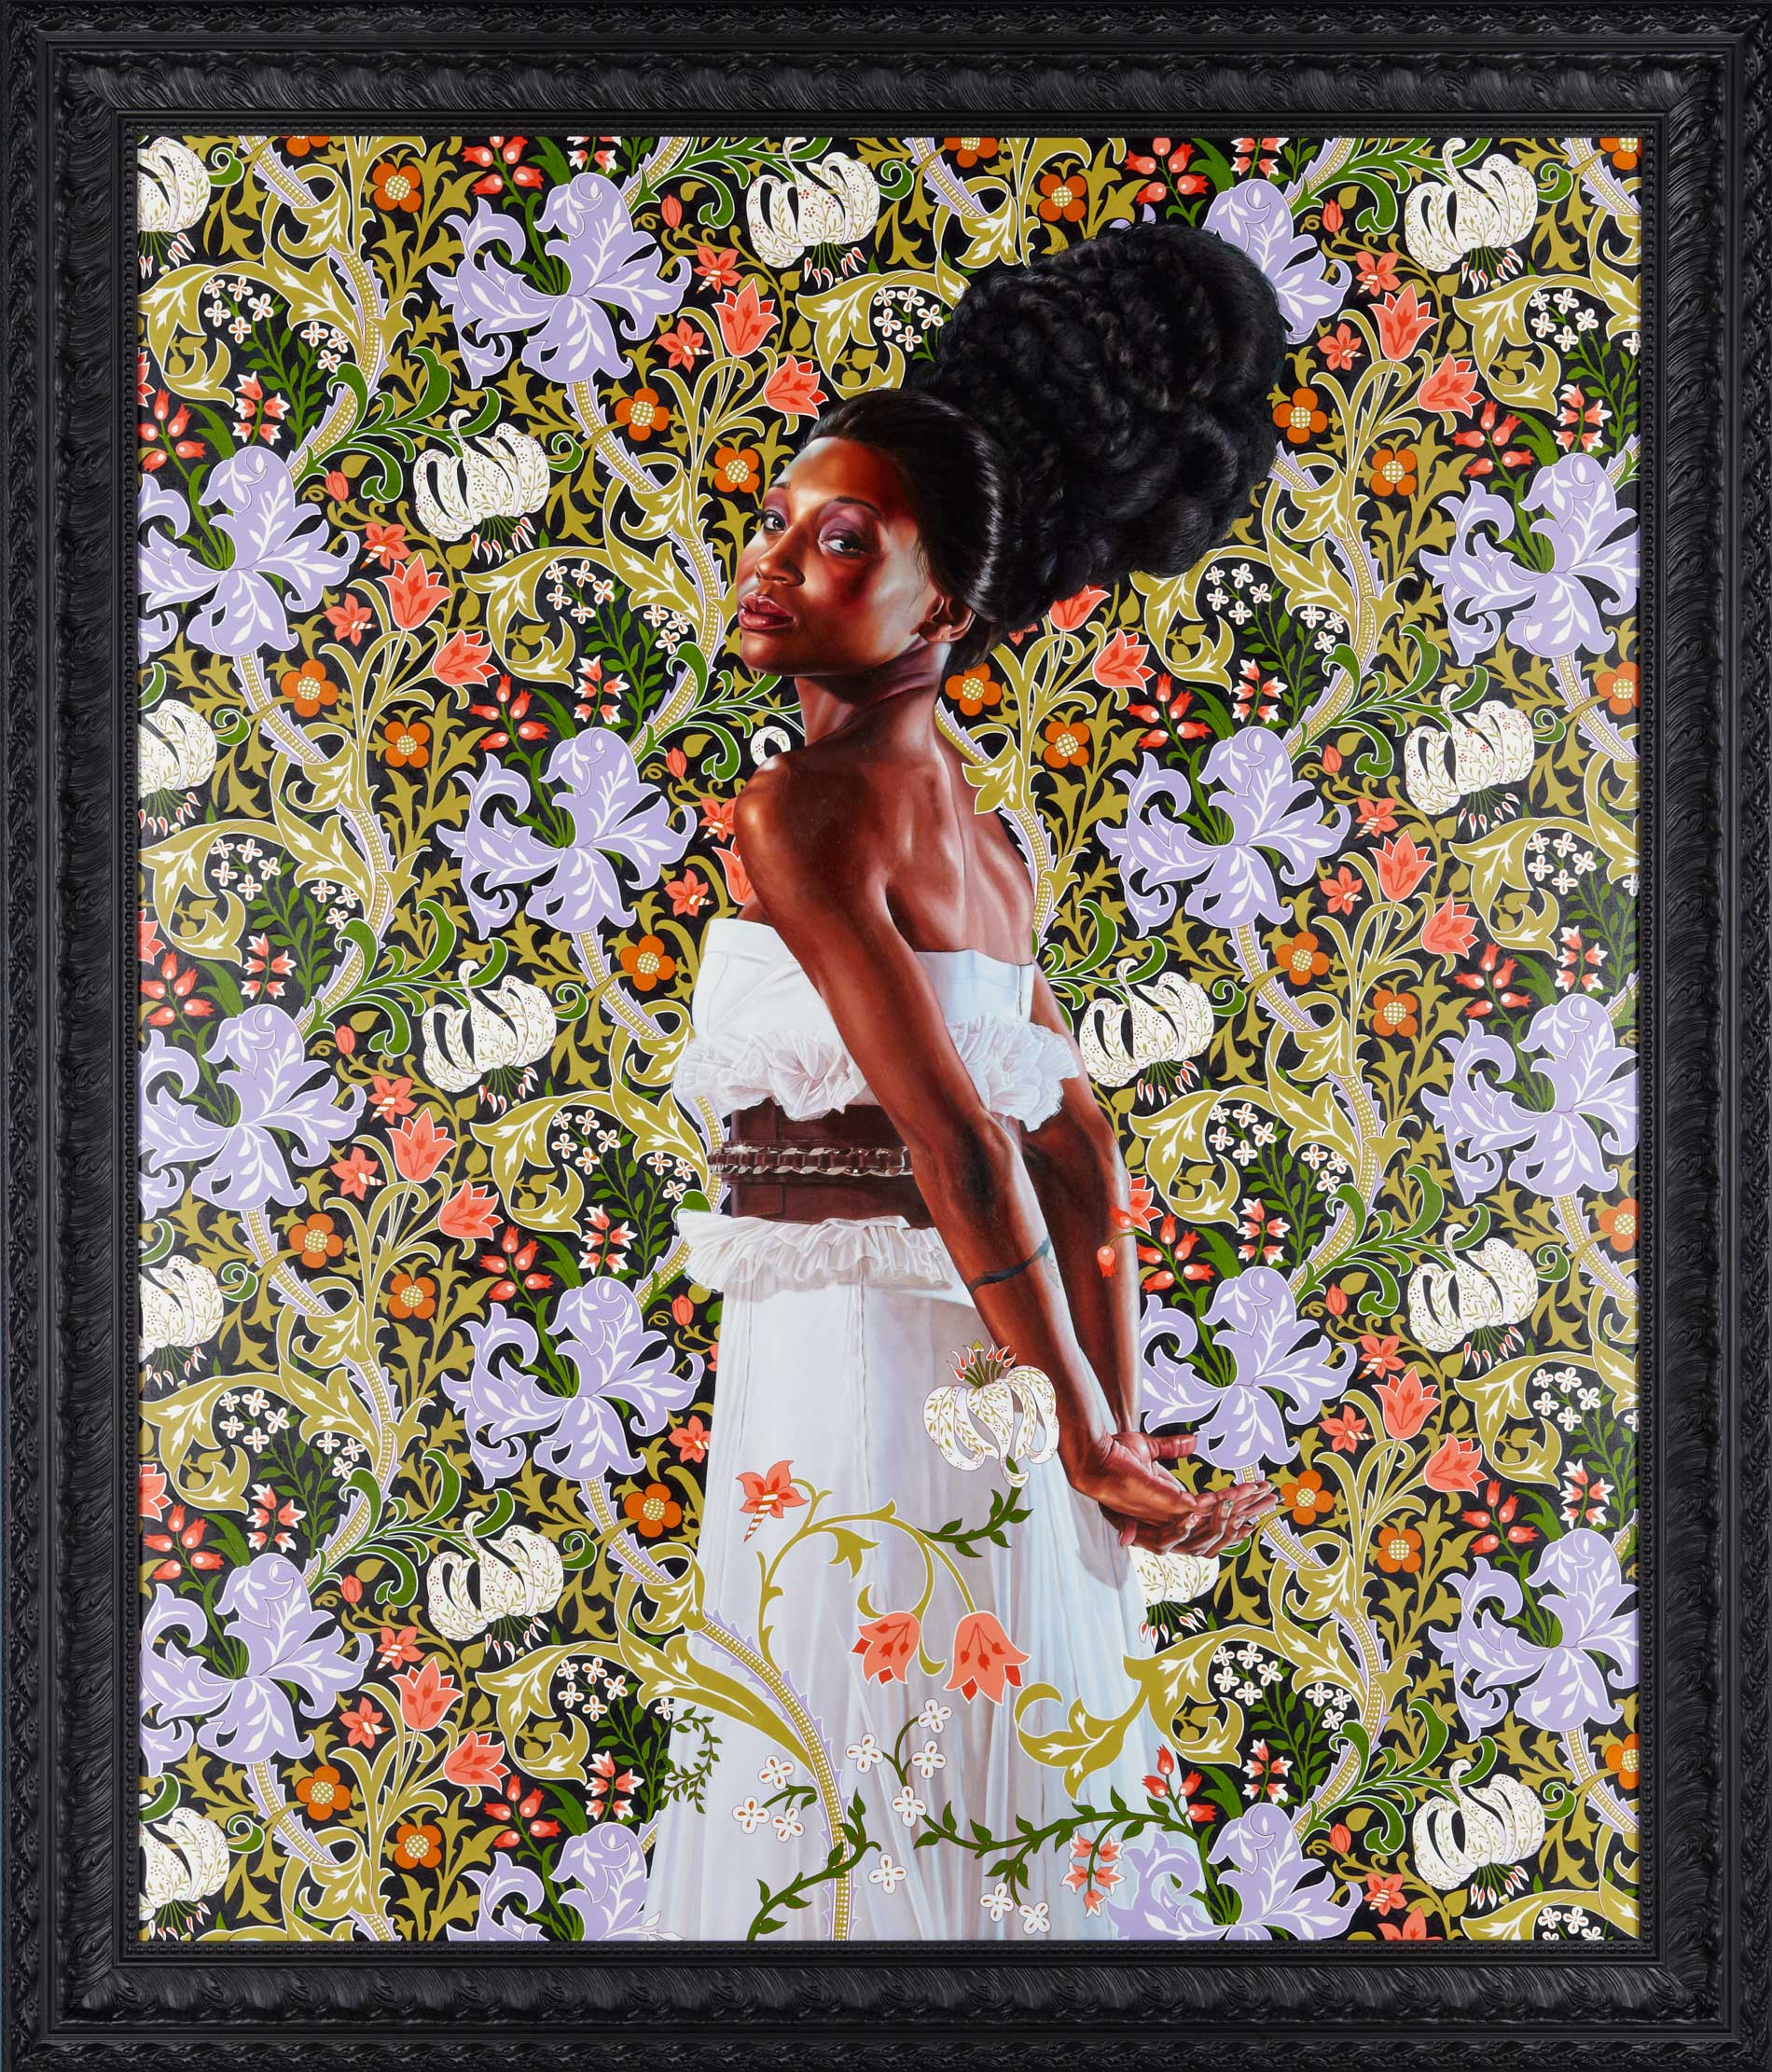 Kehinde Wiley | An Economy of Grace | 1